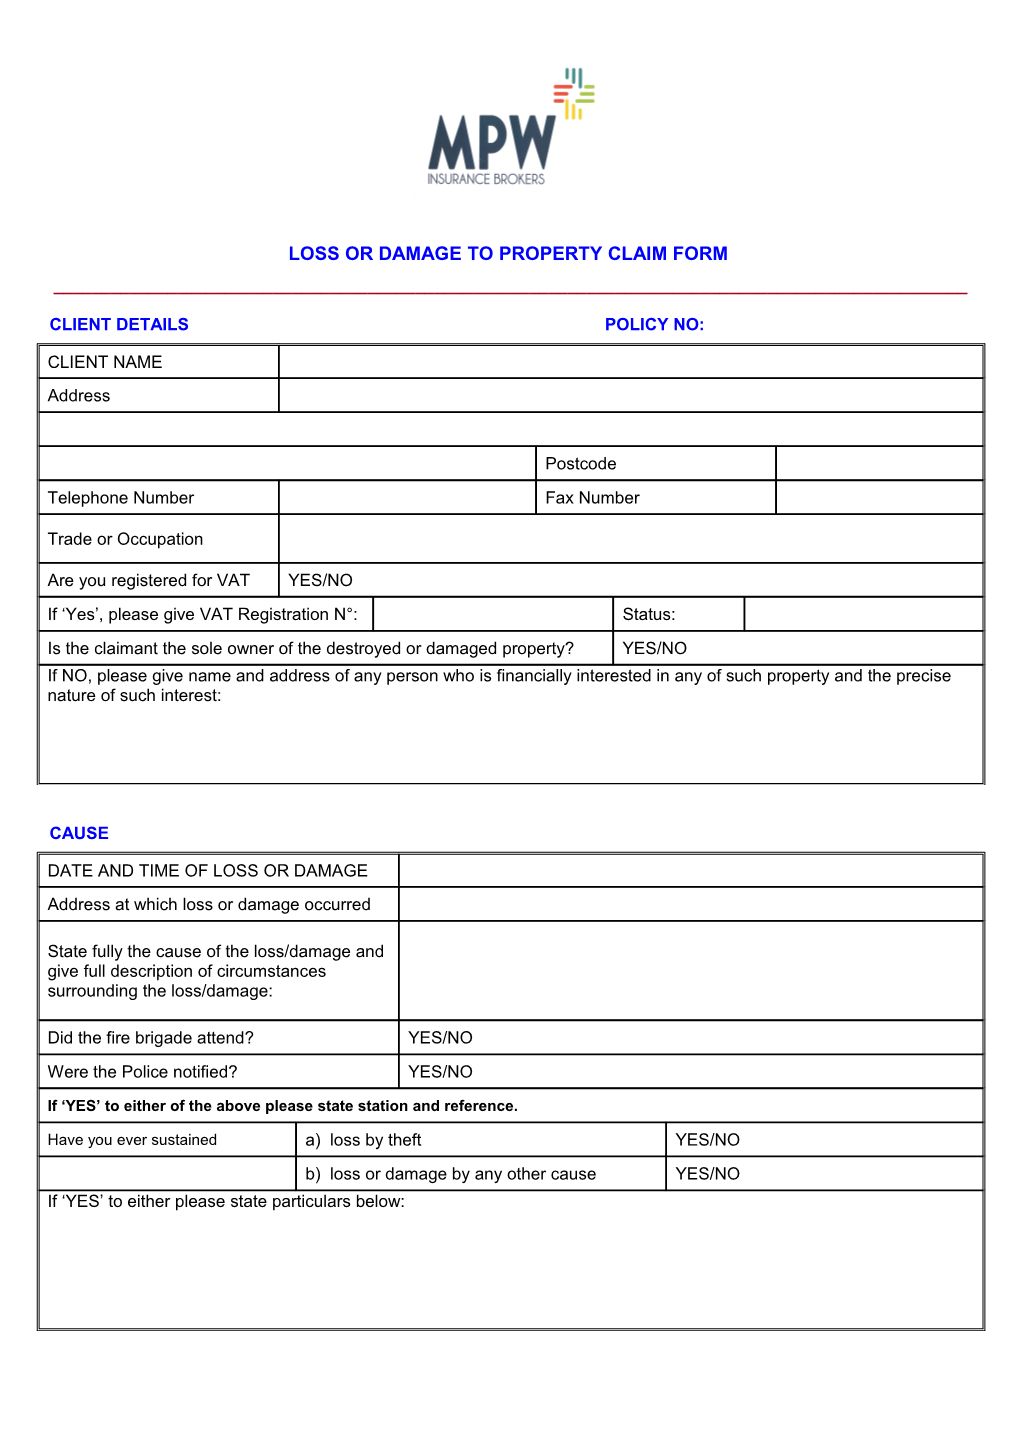 Loss Or Damage to Property Claim Form